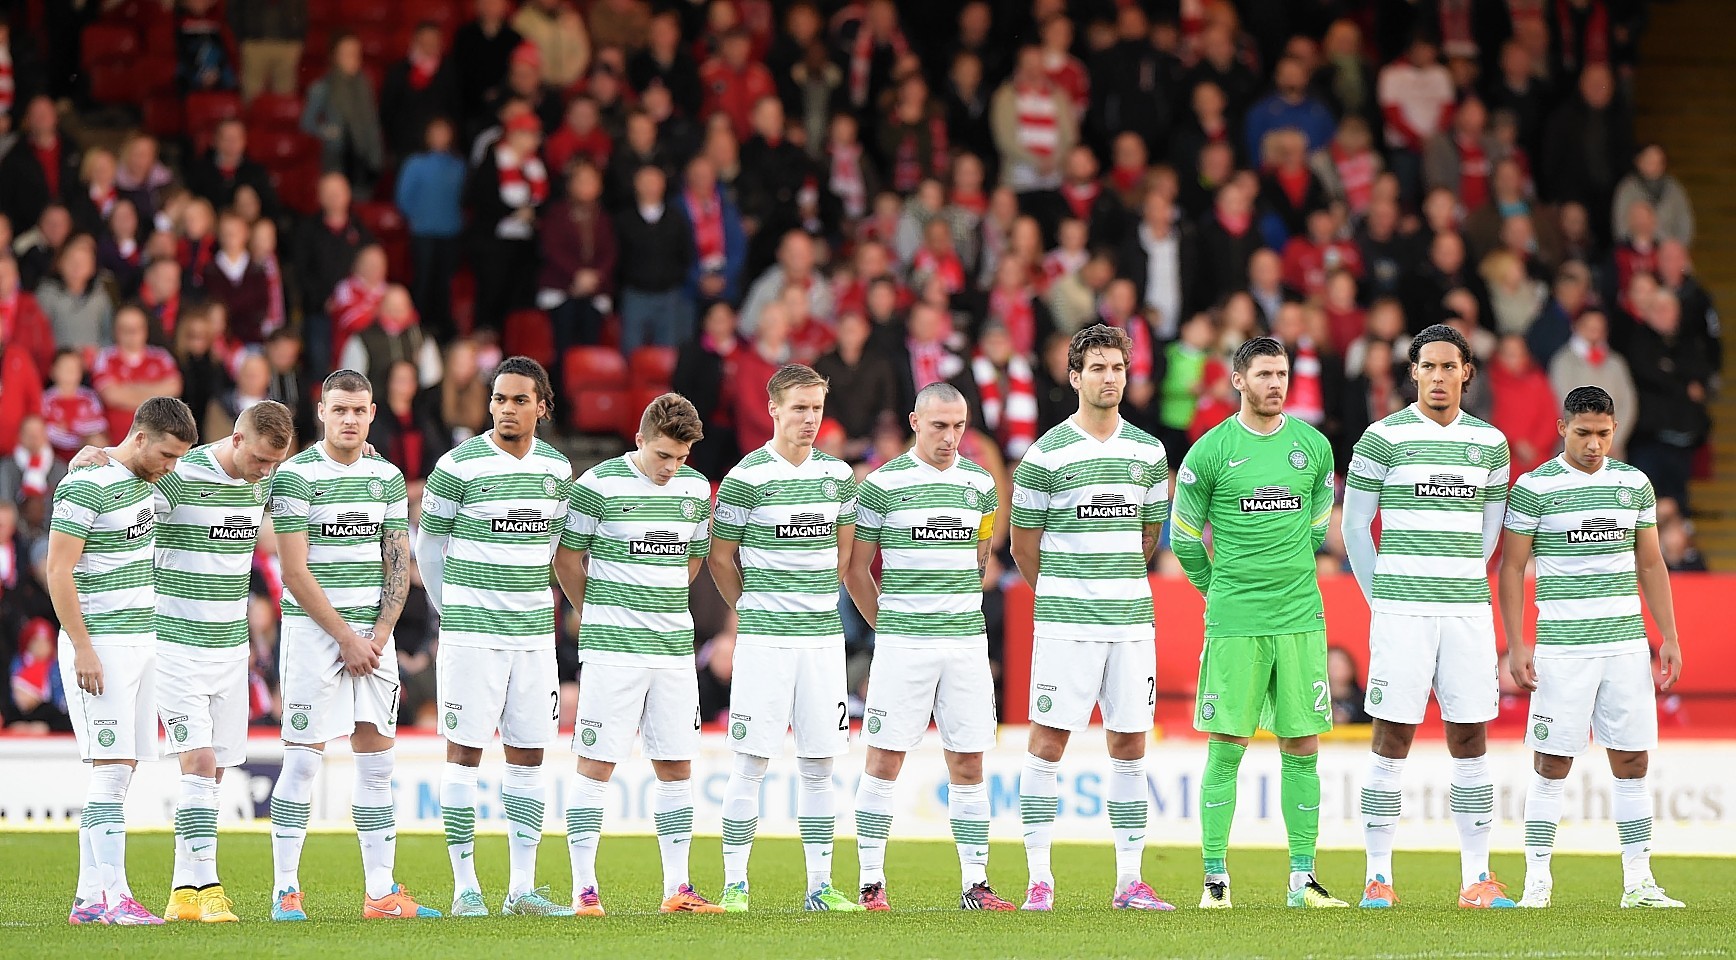 The Celtic players pay their respects prior to the match at Pittodrie.